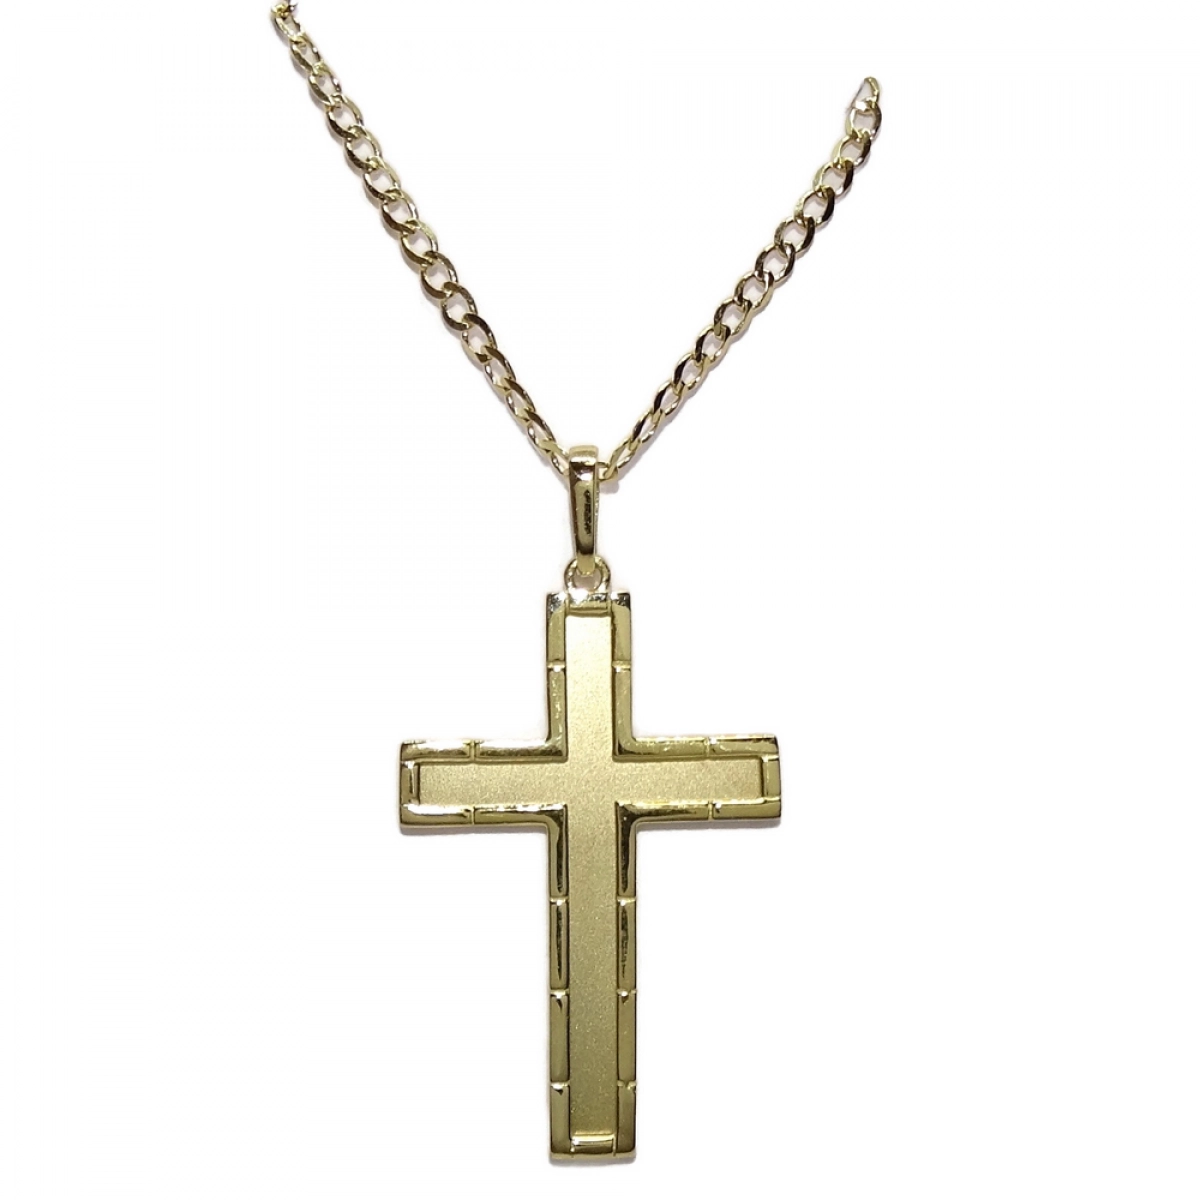 CROSS OF YELLOW GOLD SOLID 18K MENS MATTE AND BRIGHTNESS, WITH STRING BILBAO SOLID 50CM. Never say never